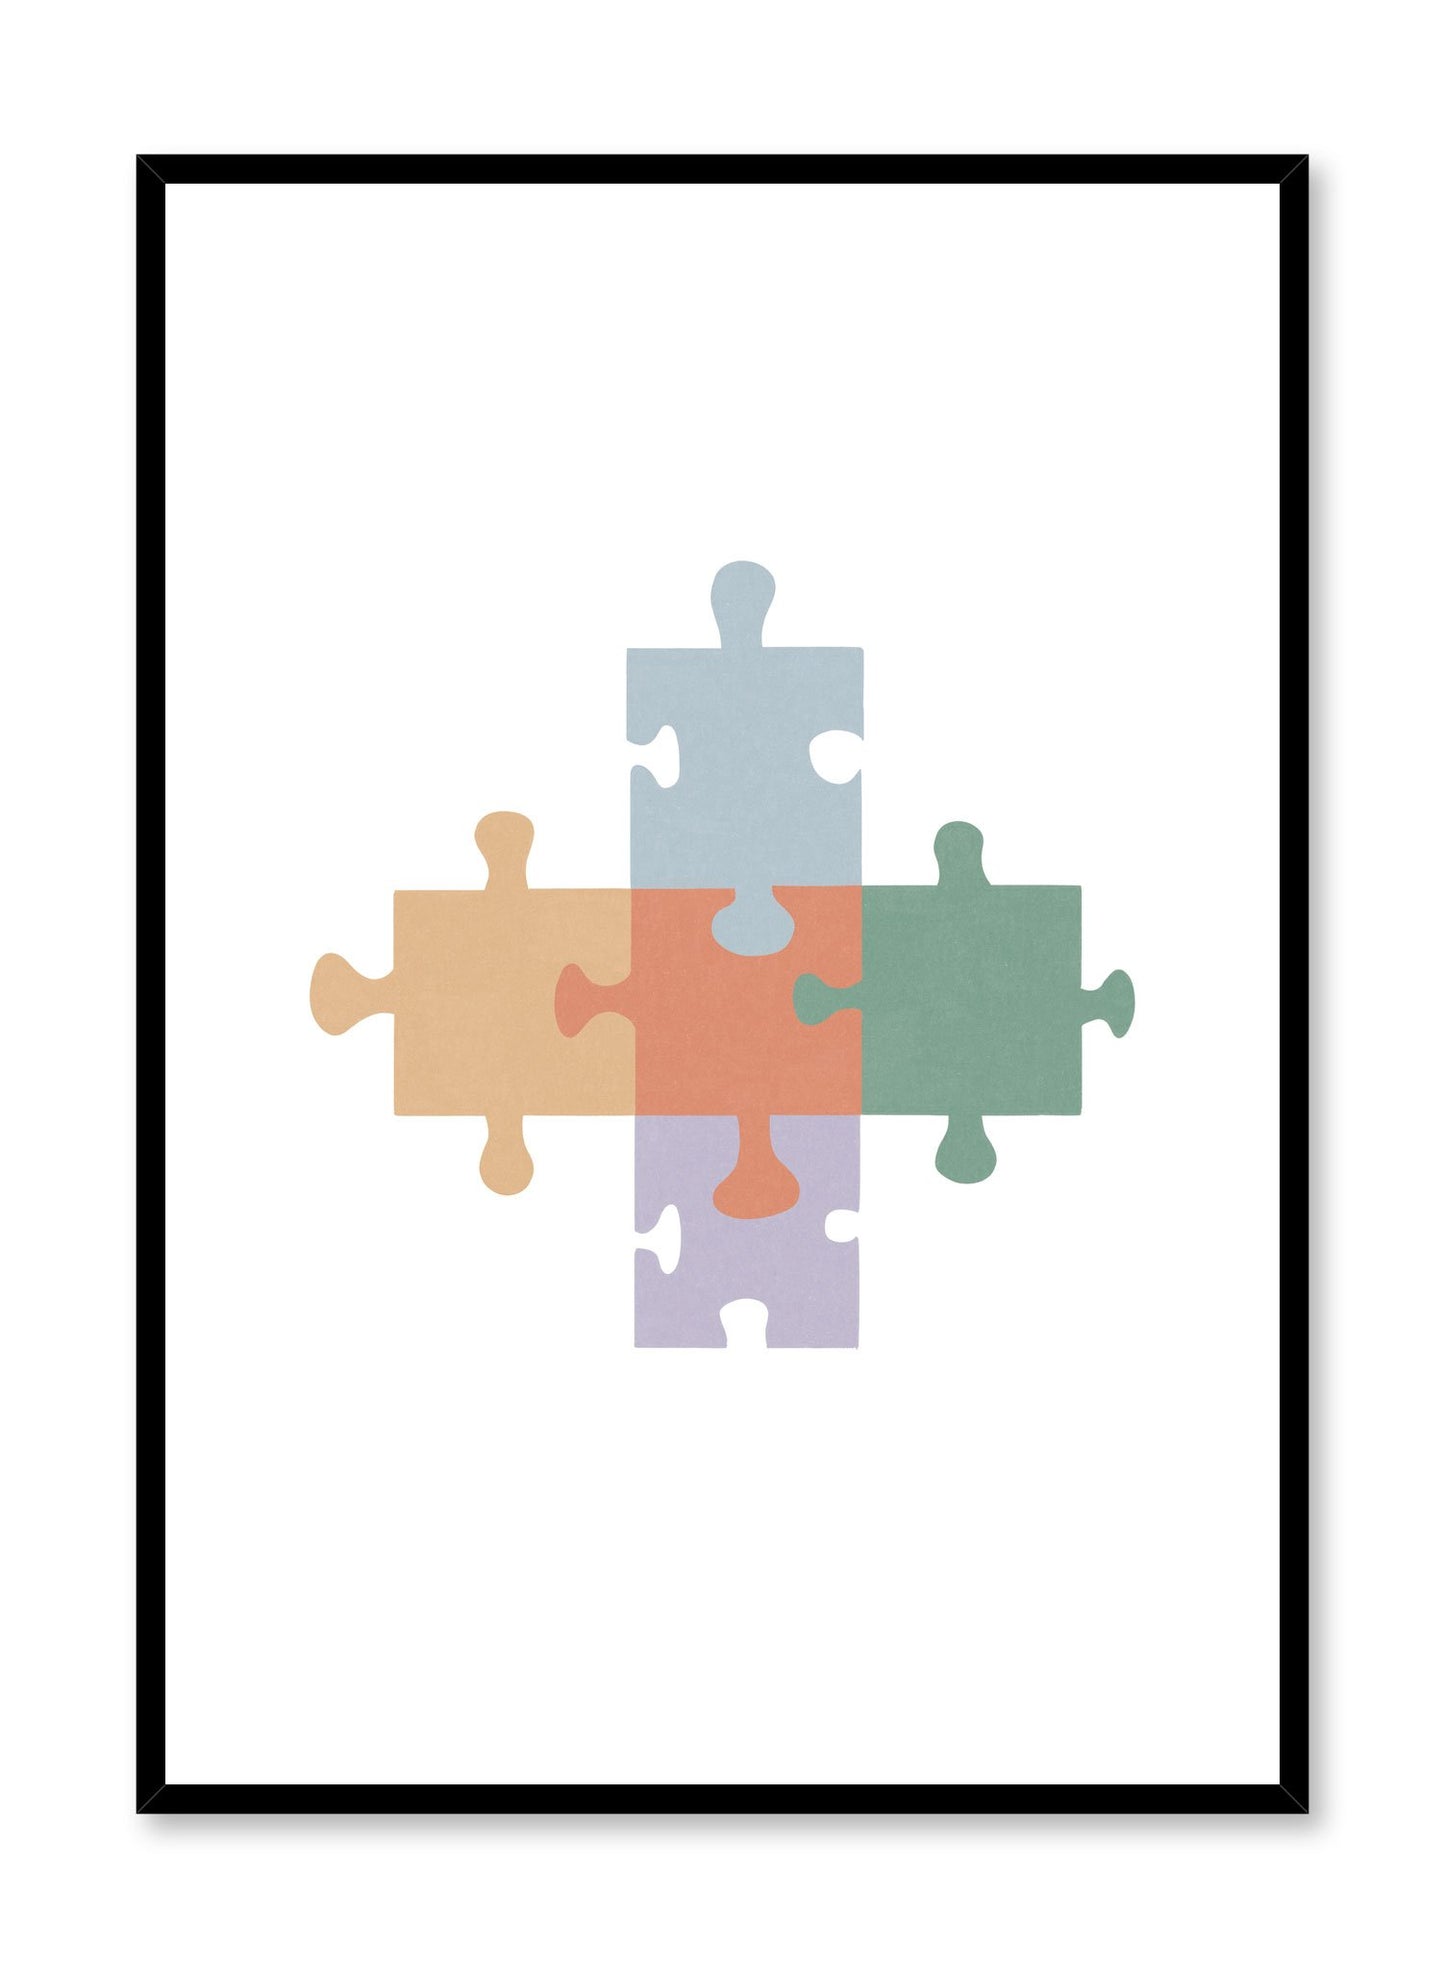 Happy Puzzle is a minimalist illustration by Opposite Wall of five pieces of a puzzle fitting together perfectly.